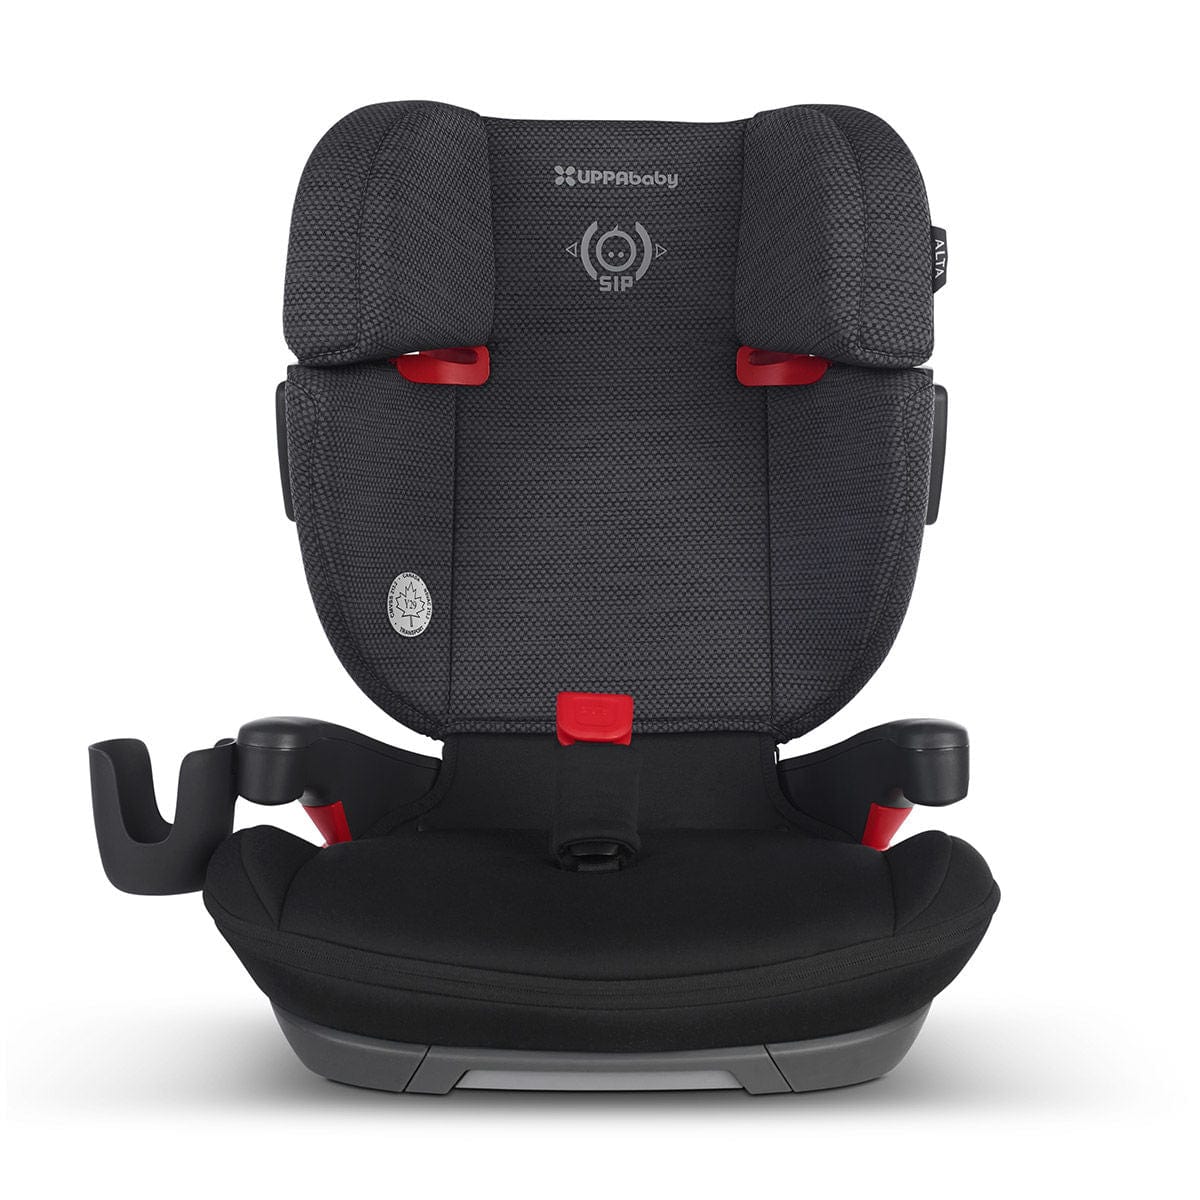 UPPAbaby booster seat UPPAbaby ALTA Full-Back Booster Seat